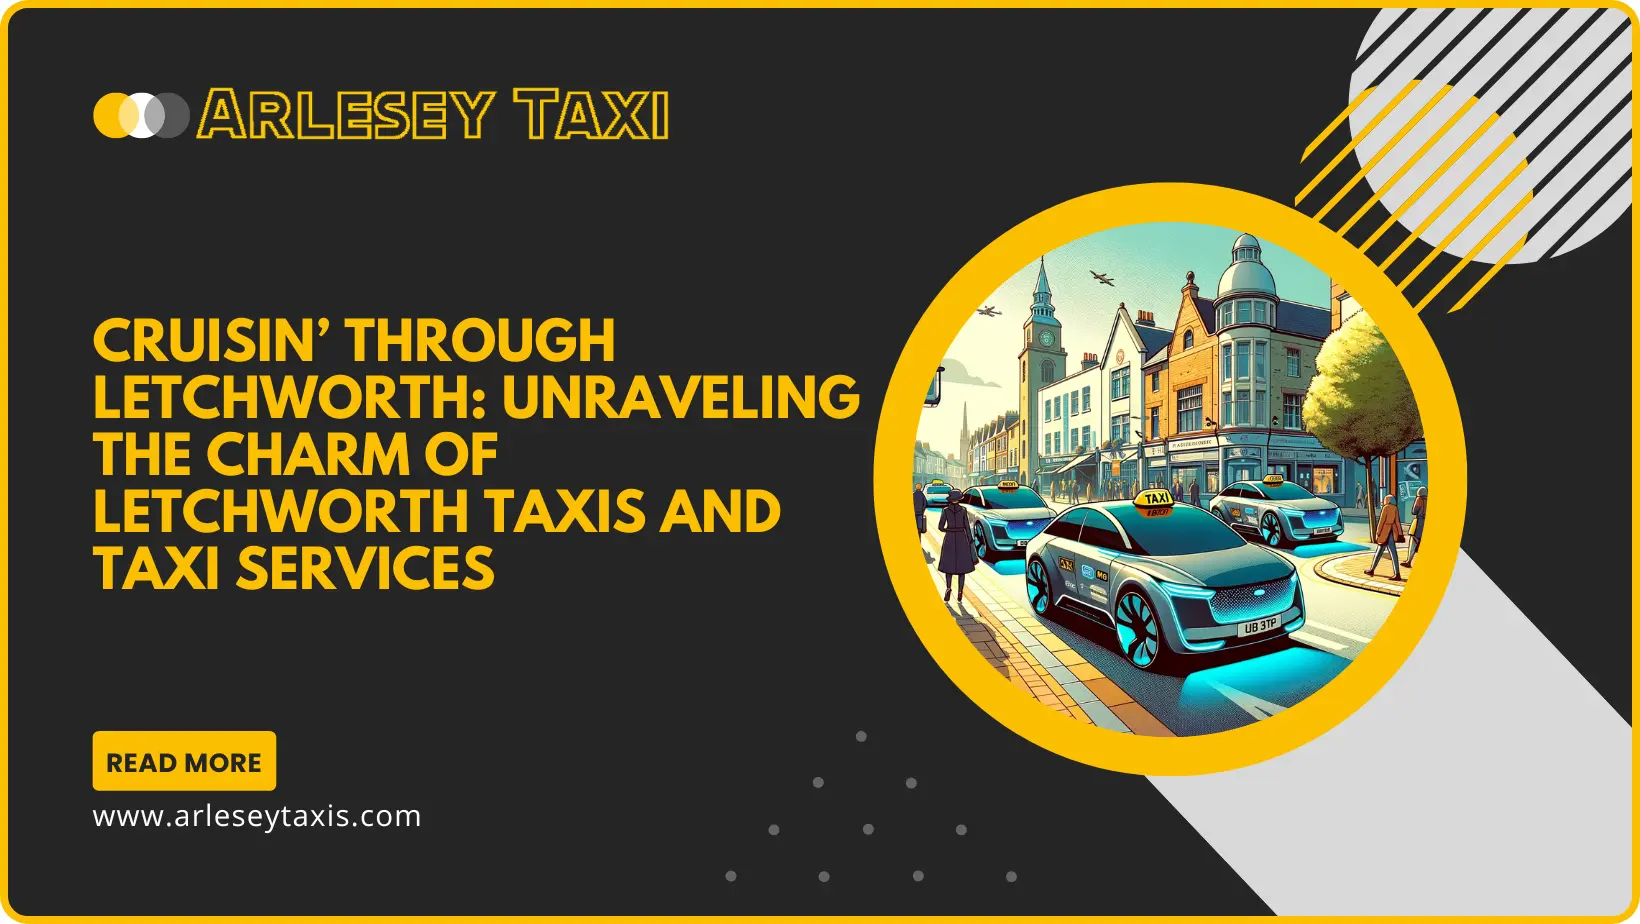 Cruisin’ Through Letchworth Unraveling the Charm of Letchworth Taxis and Taxi Services